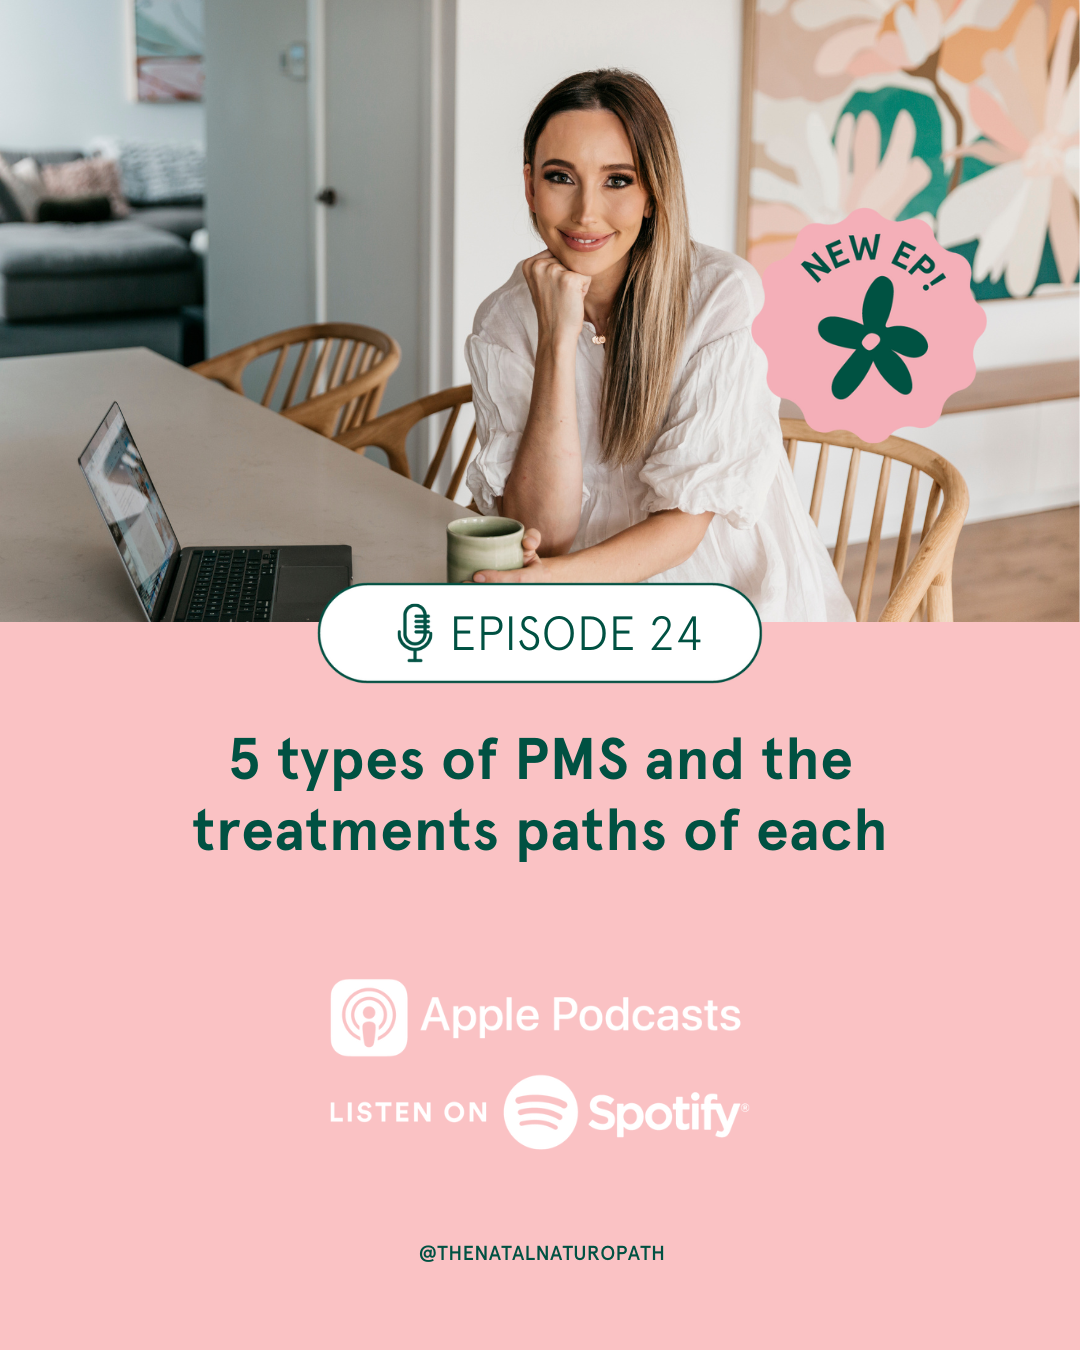 5 types of PMS and the treatments paths of each